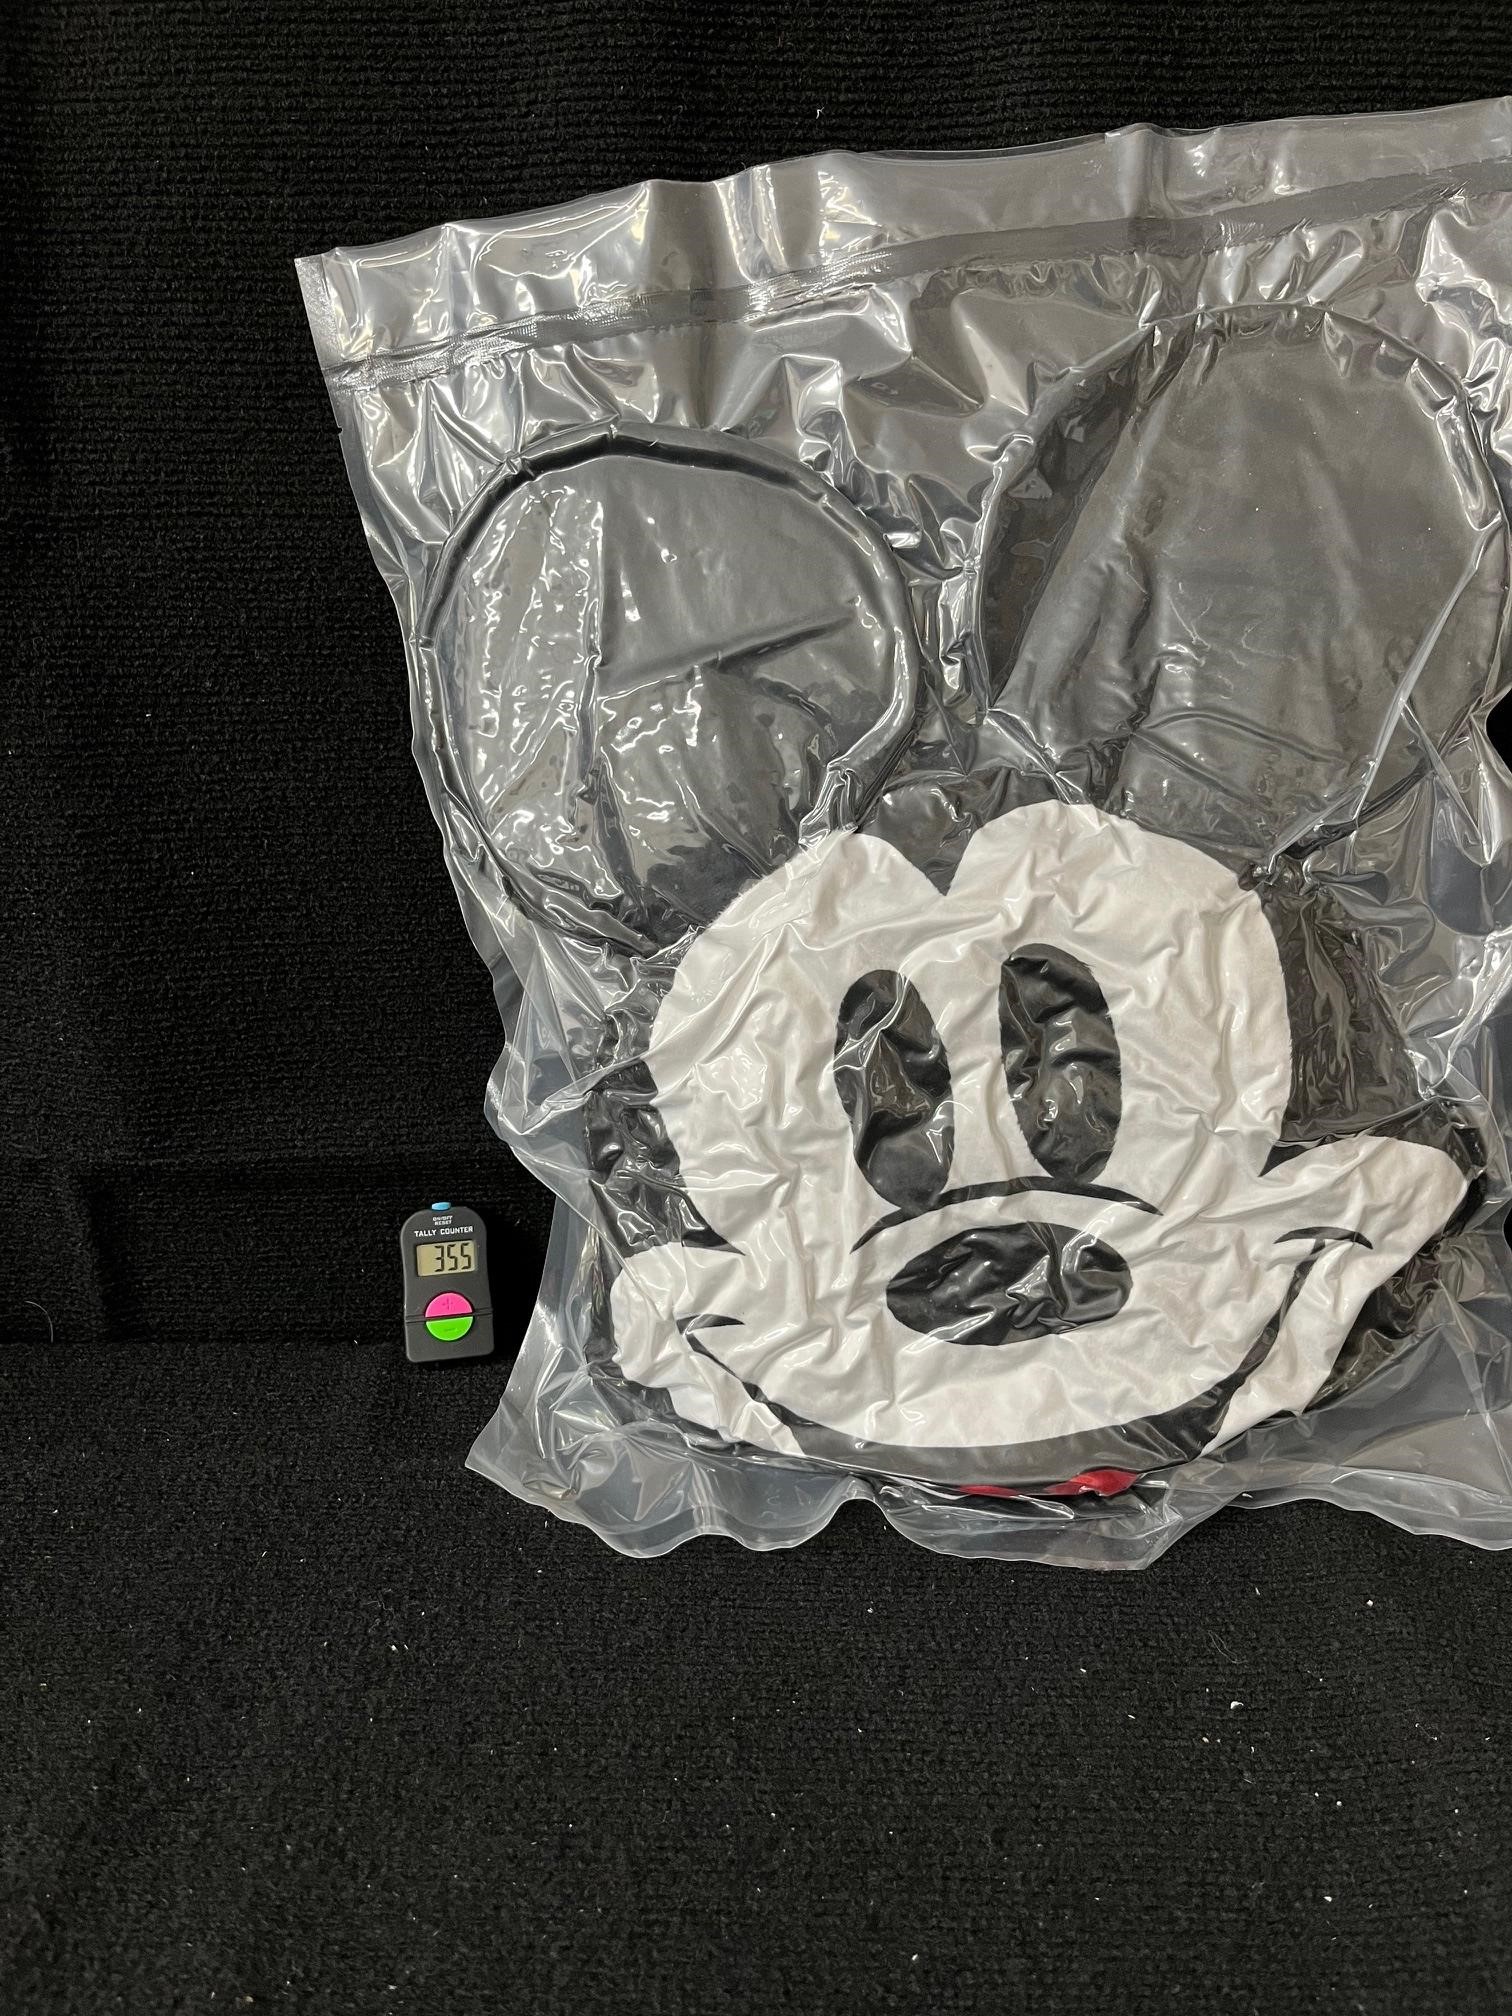 Mickey Mouse Pillow sealed